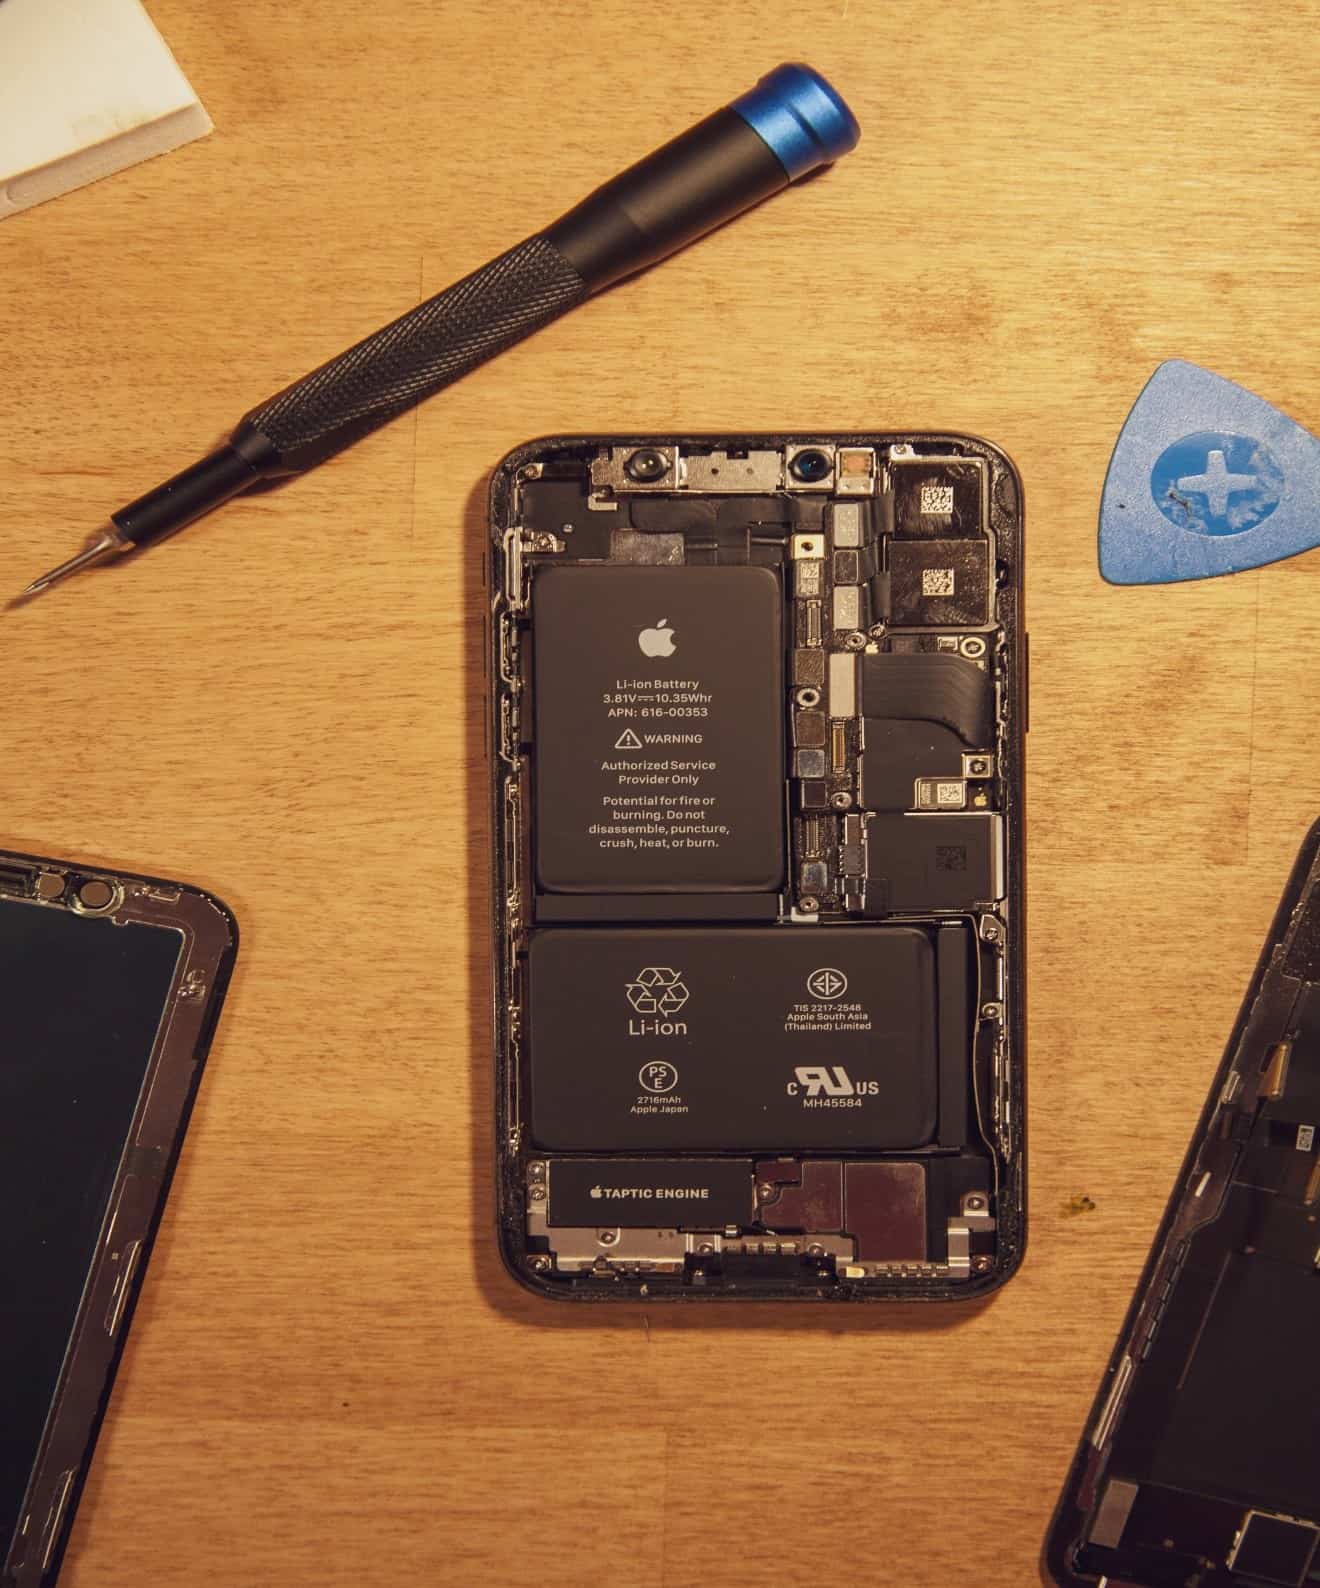 iPhone Repair Services: Choose The Best Option For You